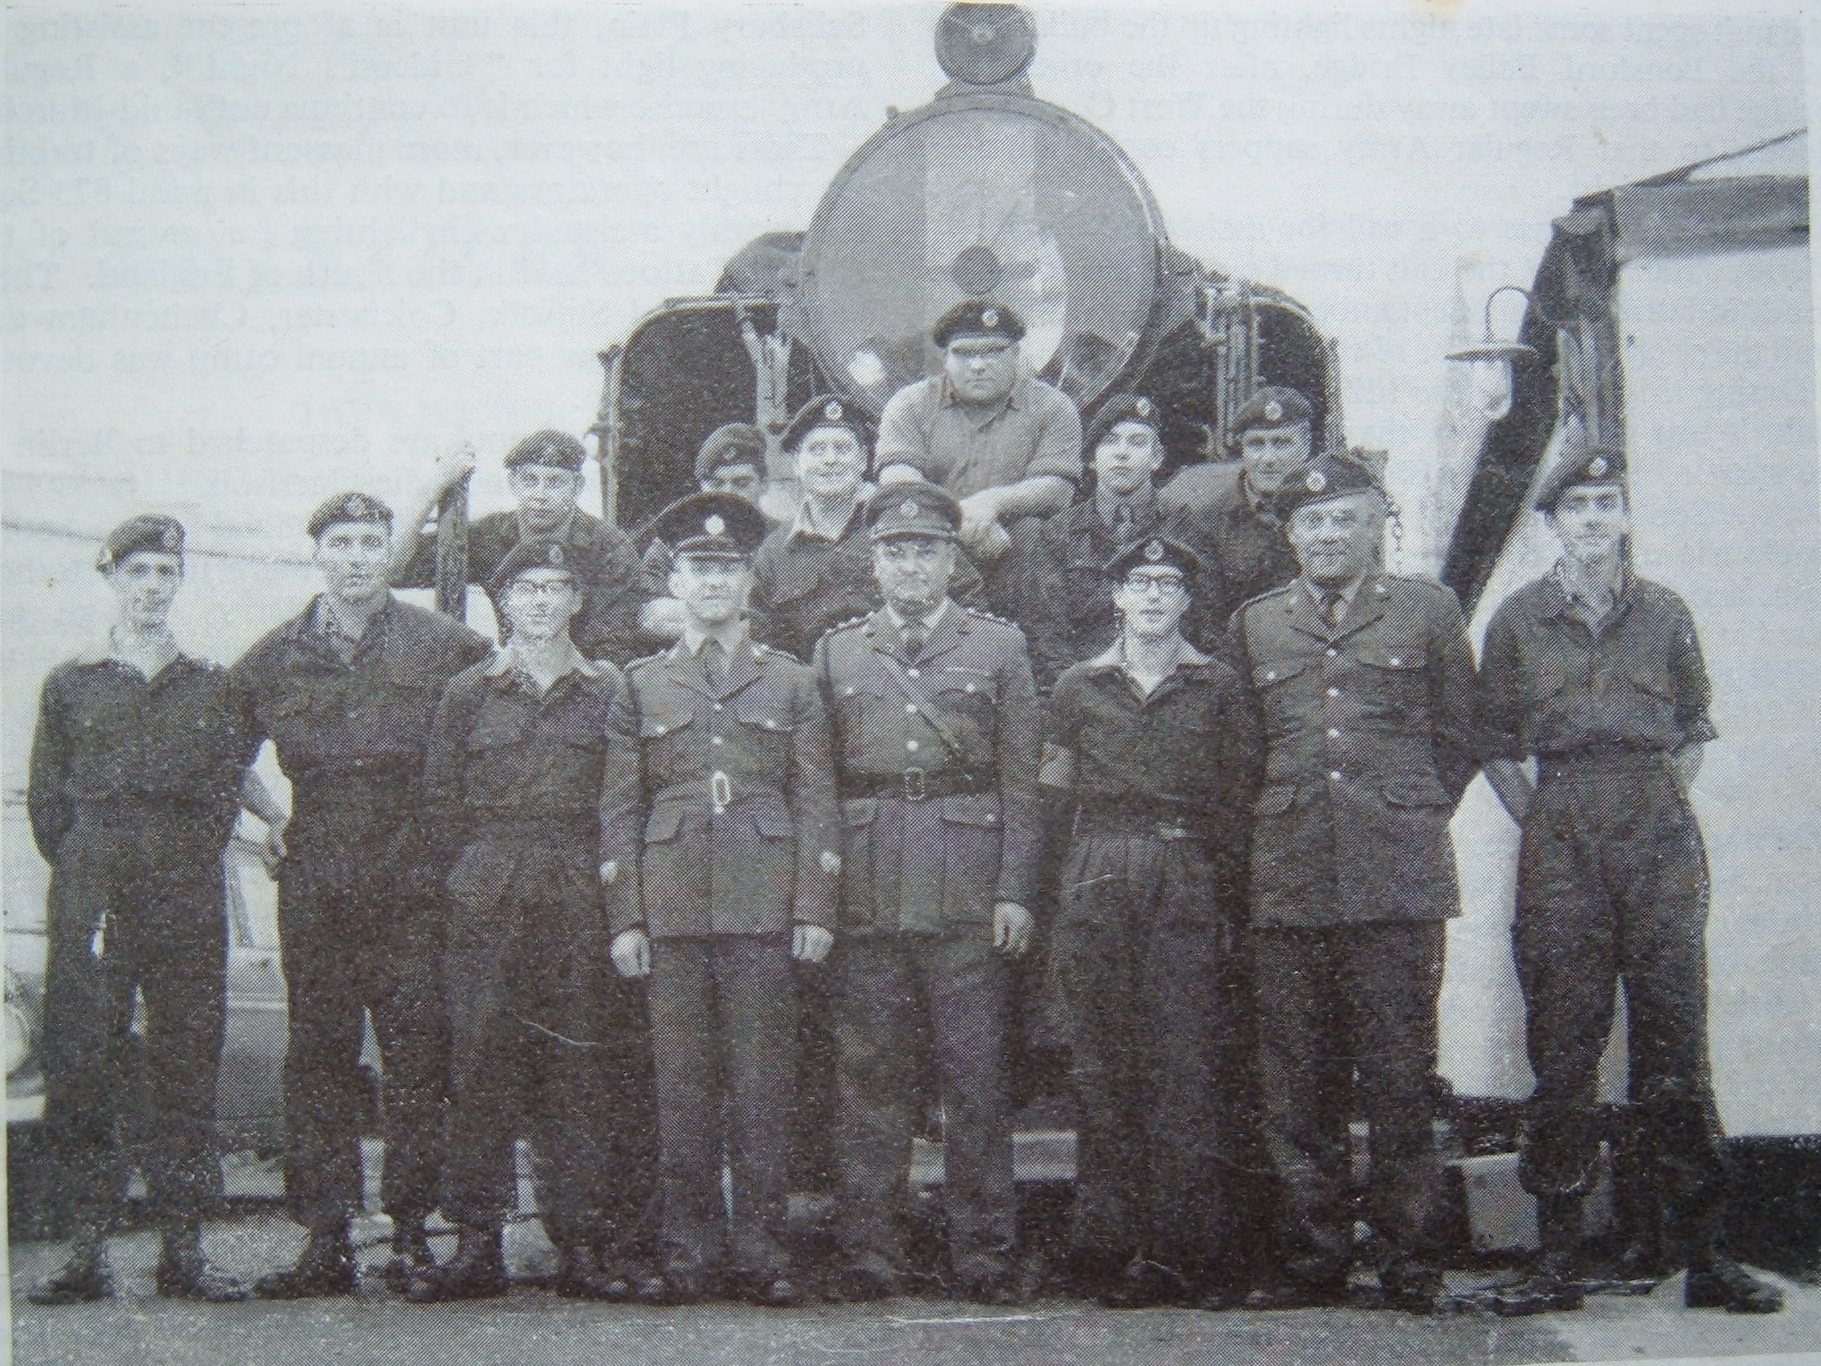 873's team at the Ulster Tattoo, 1968